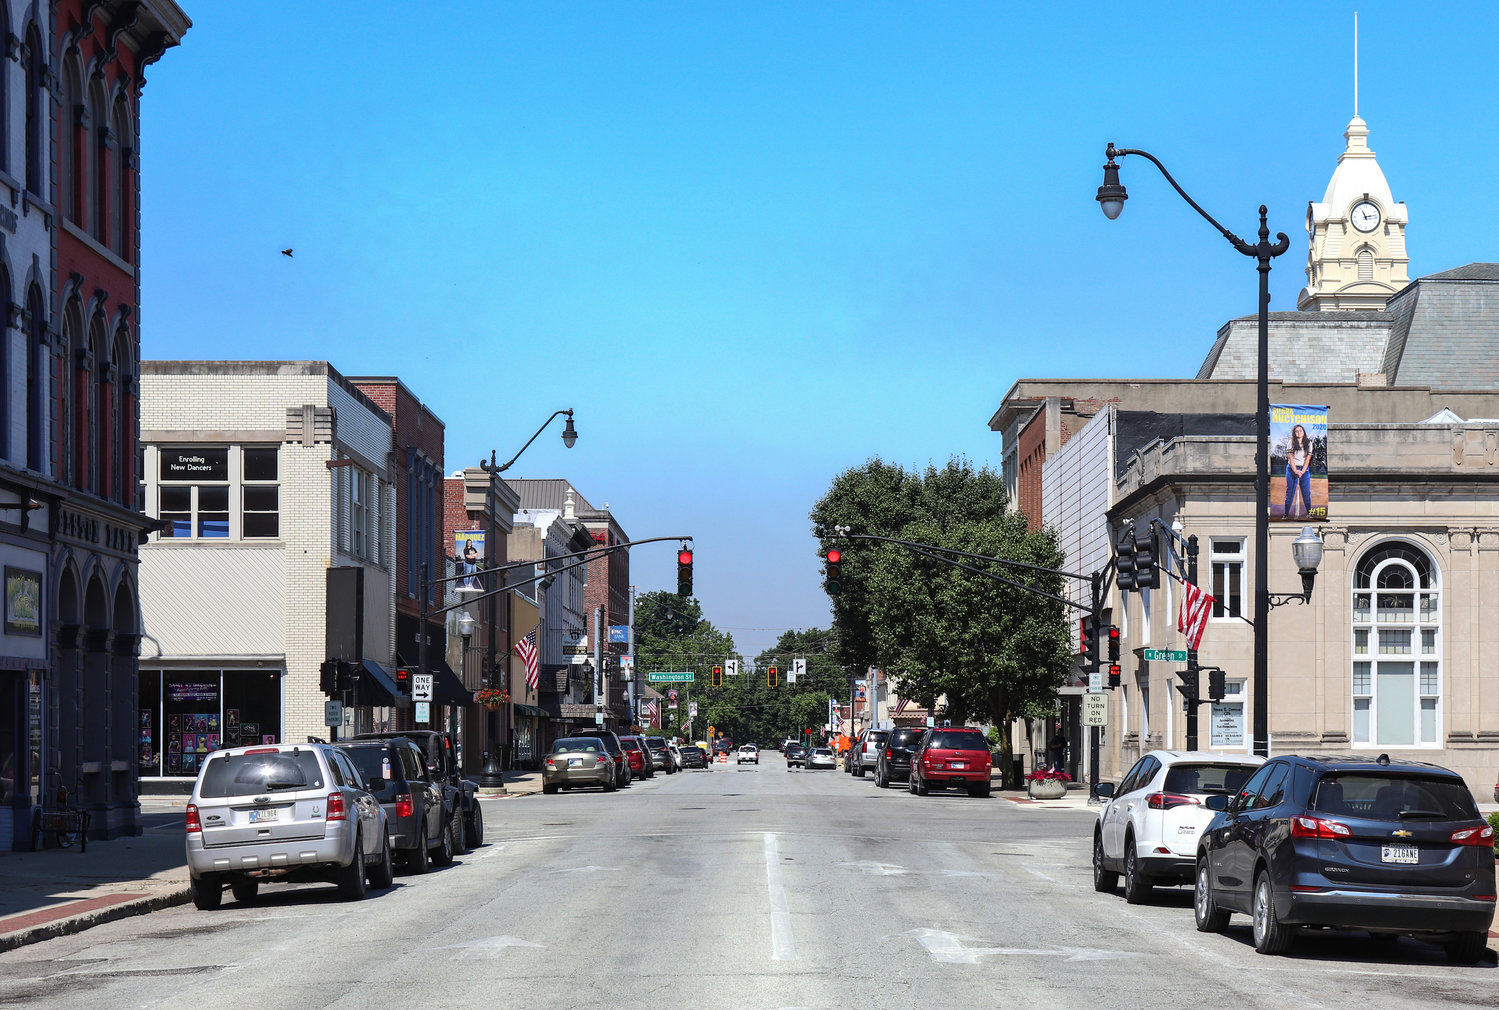 This is an image of Main Street facing west near the intersection of Green Street.